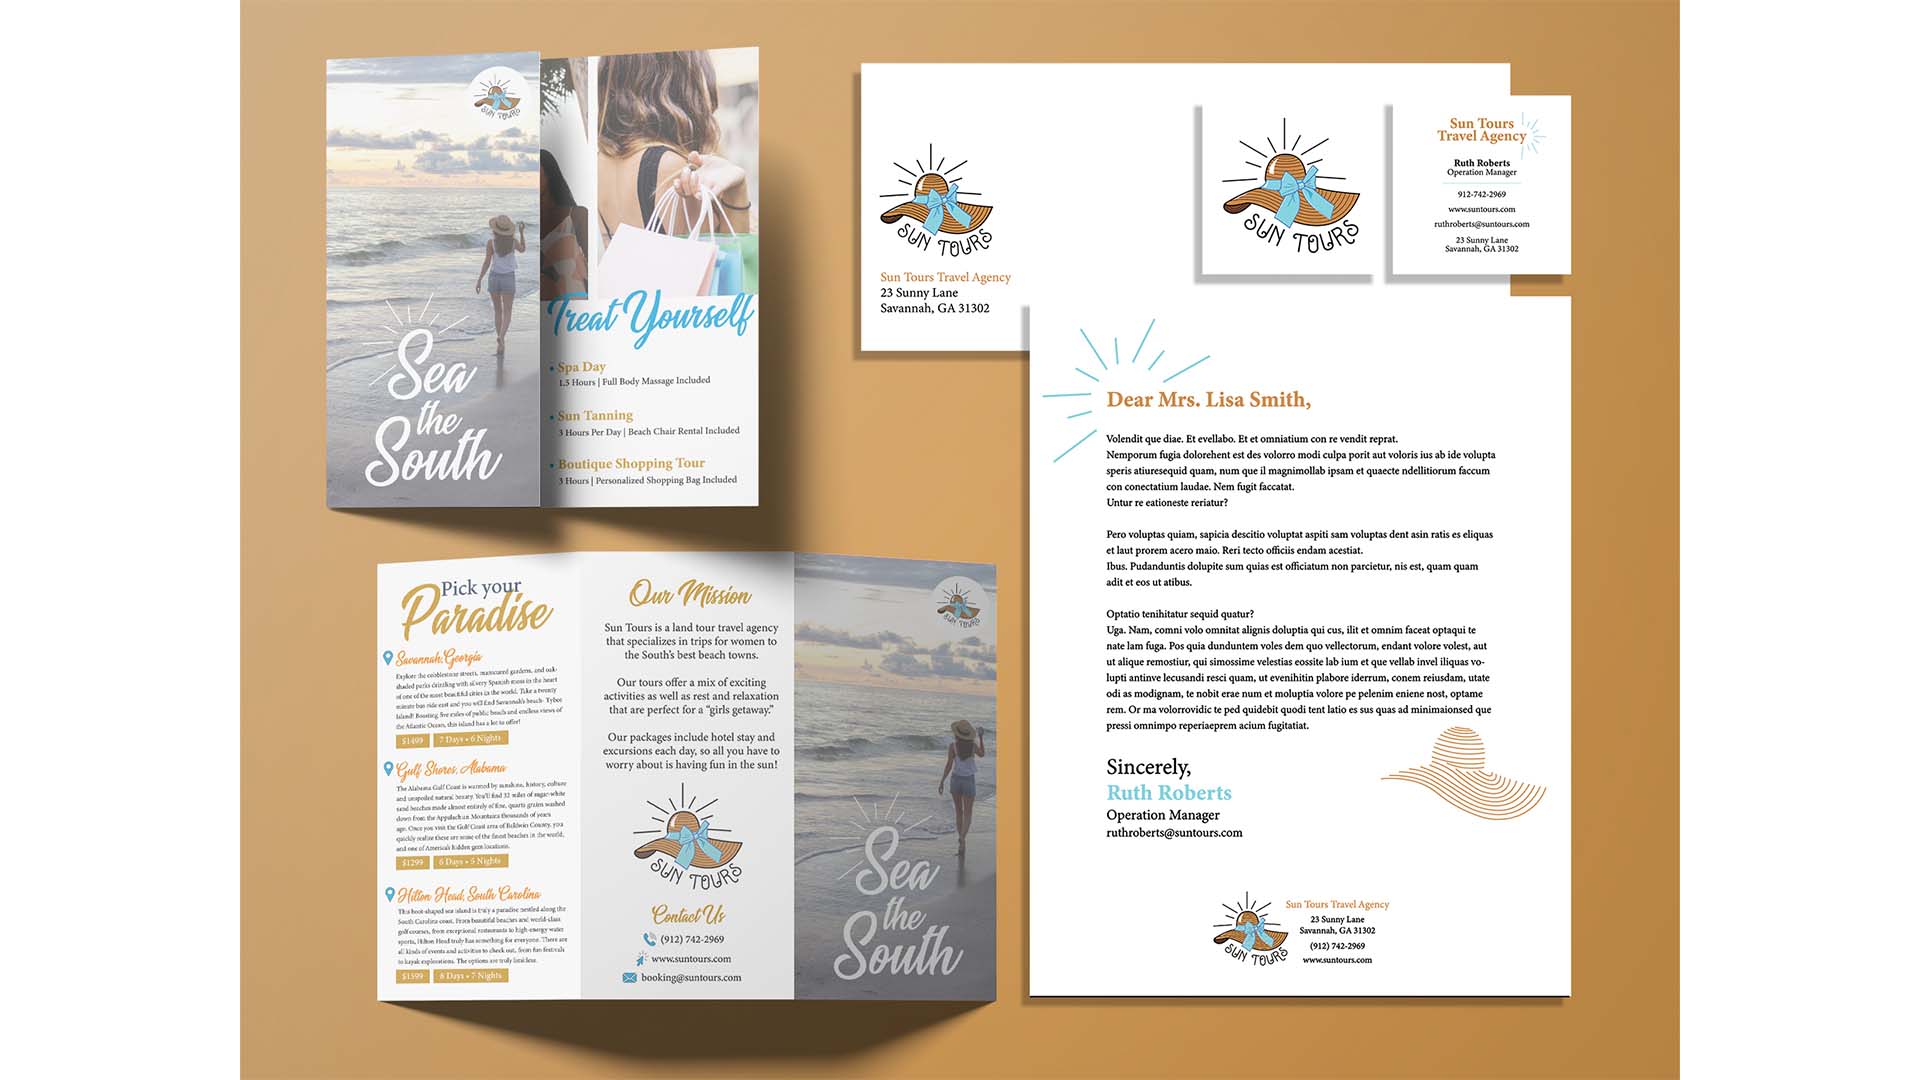  / “Sun Tours Travel Agency,” brand identity, 2020. These are a stationery set and a brochure for a travel agency specializing in trips for women to southern beaches.